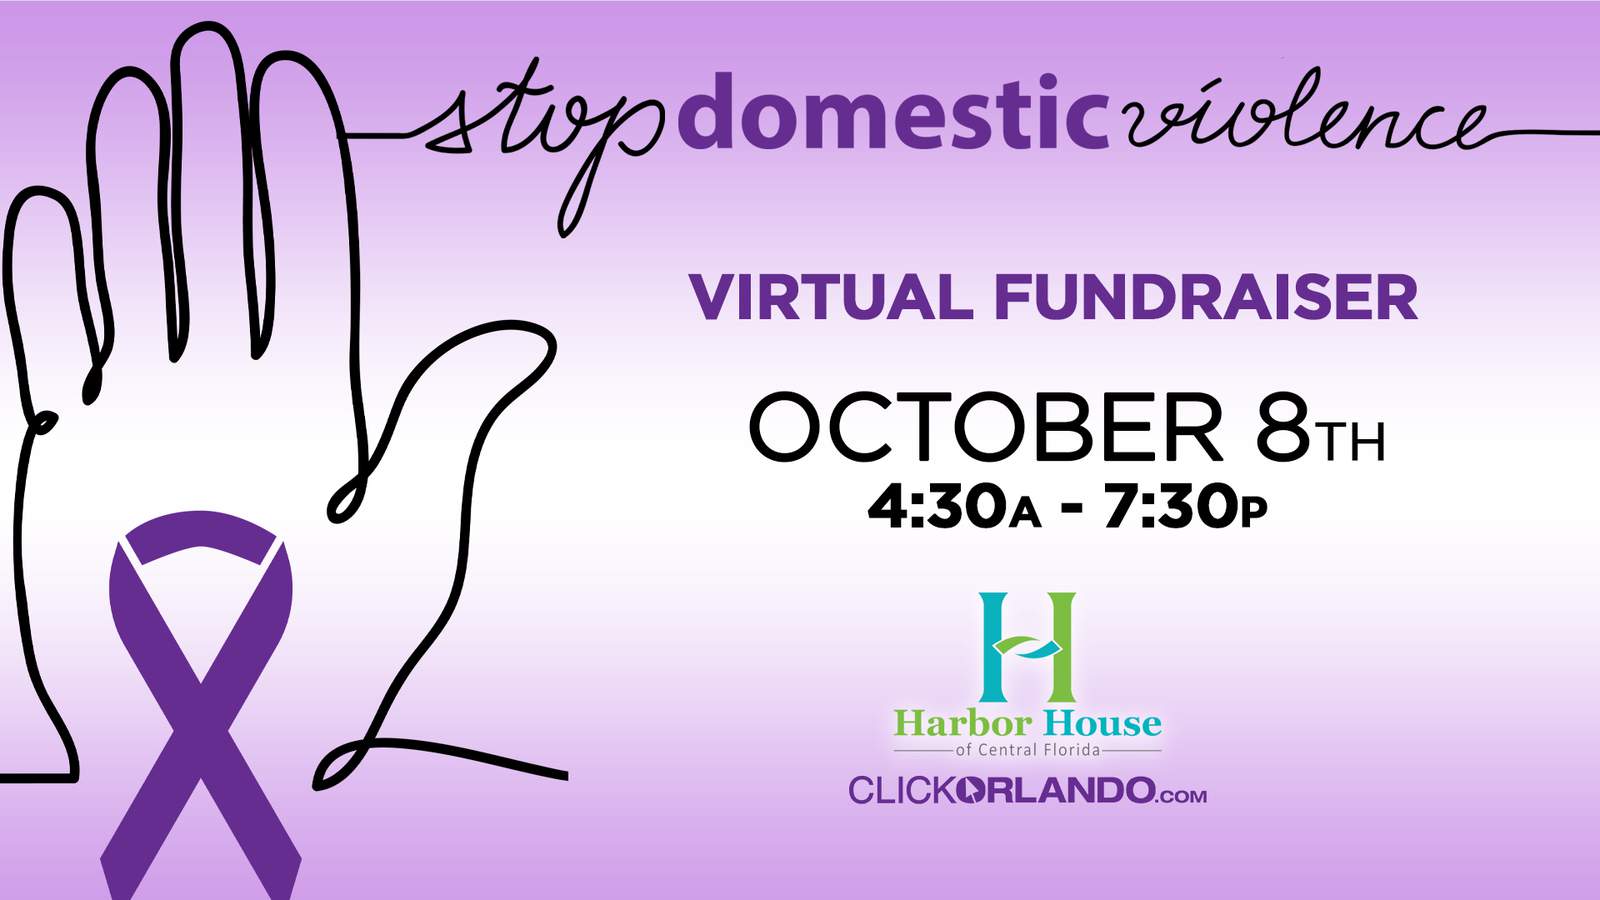 Stop domestic violence: News 6 teams up with Harbor House for fundraising event